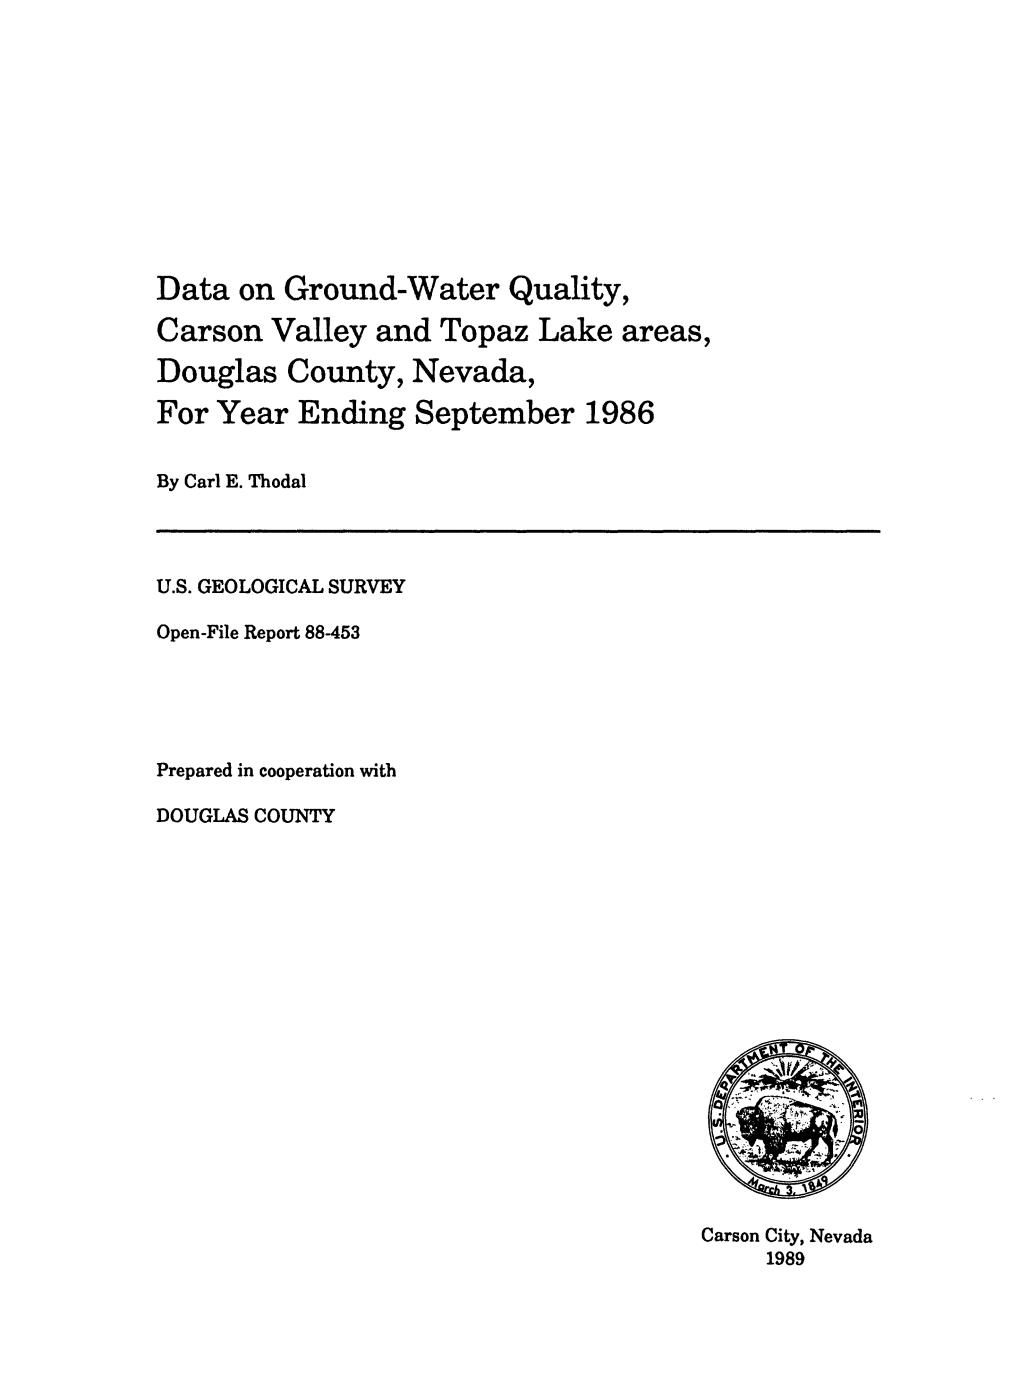 Data on Ground-Water Quality, Carson Valley and Topaz Lake Areas, Douglas County, Nevada, for Year Ending September 1986